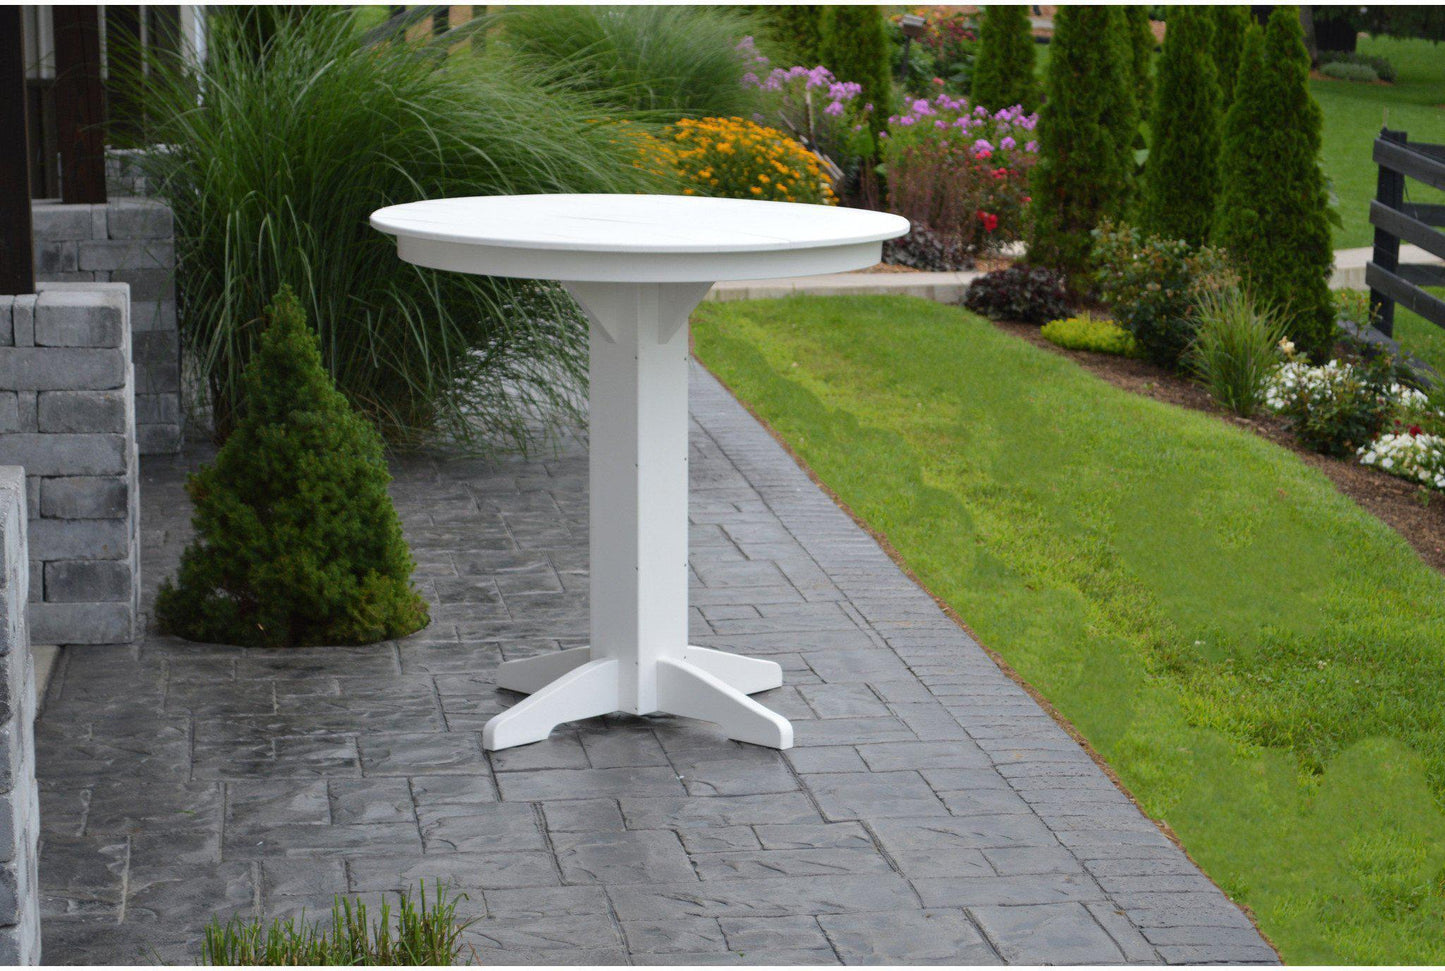 A&L Furniture Recycled Plastic 44" Round Bar Table - White